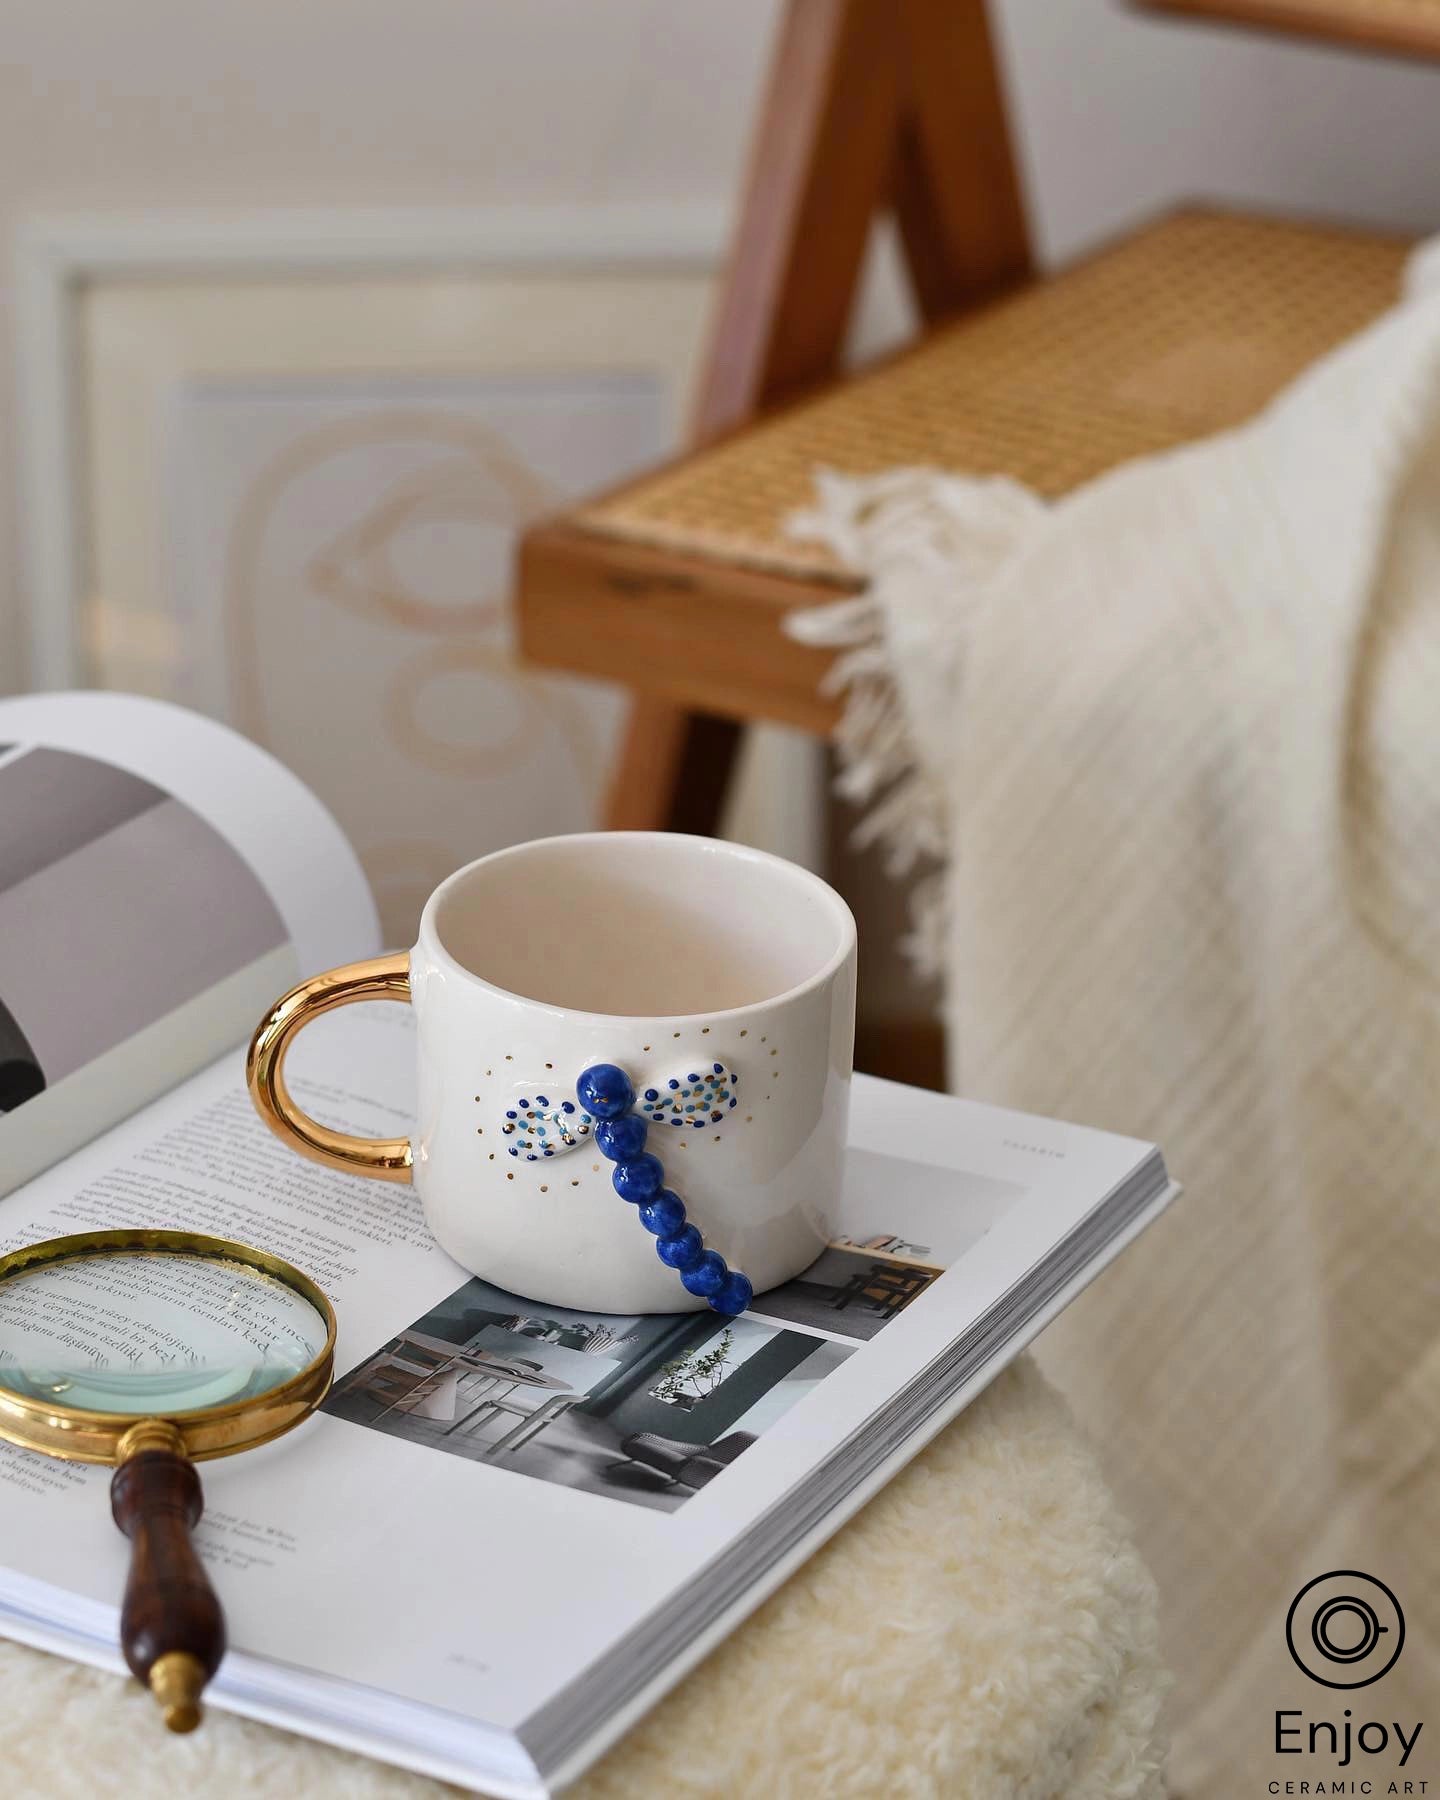 Cozy reading corner featuring the 'Blue Dragonfly Handmade Ceramic Coffee Mug, 10oz,' artisan-crafted with a unique blue beaded dragonfly design and a luxurious gold handle, resting on an open book beside a vintage magnifying glass.